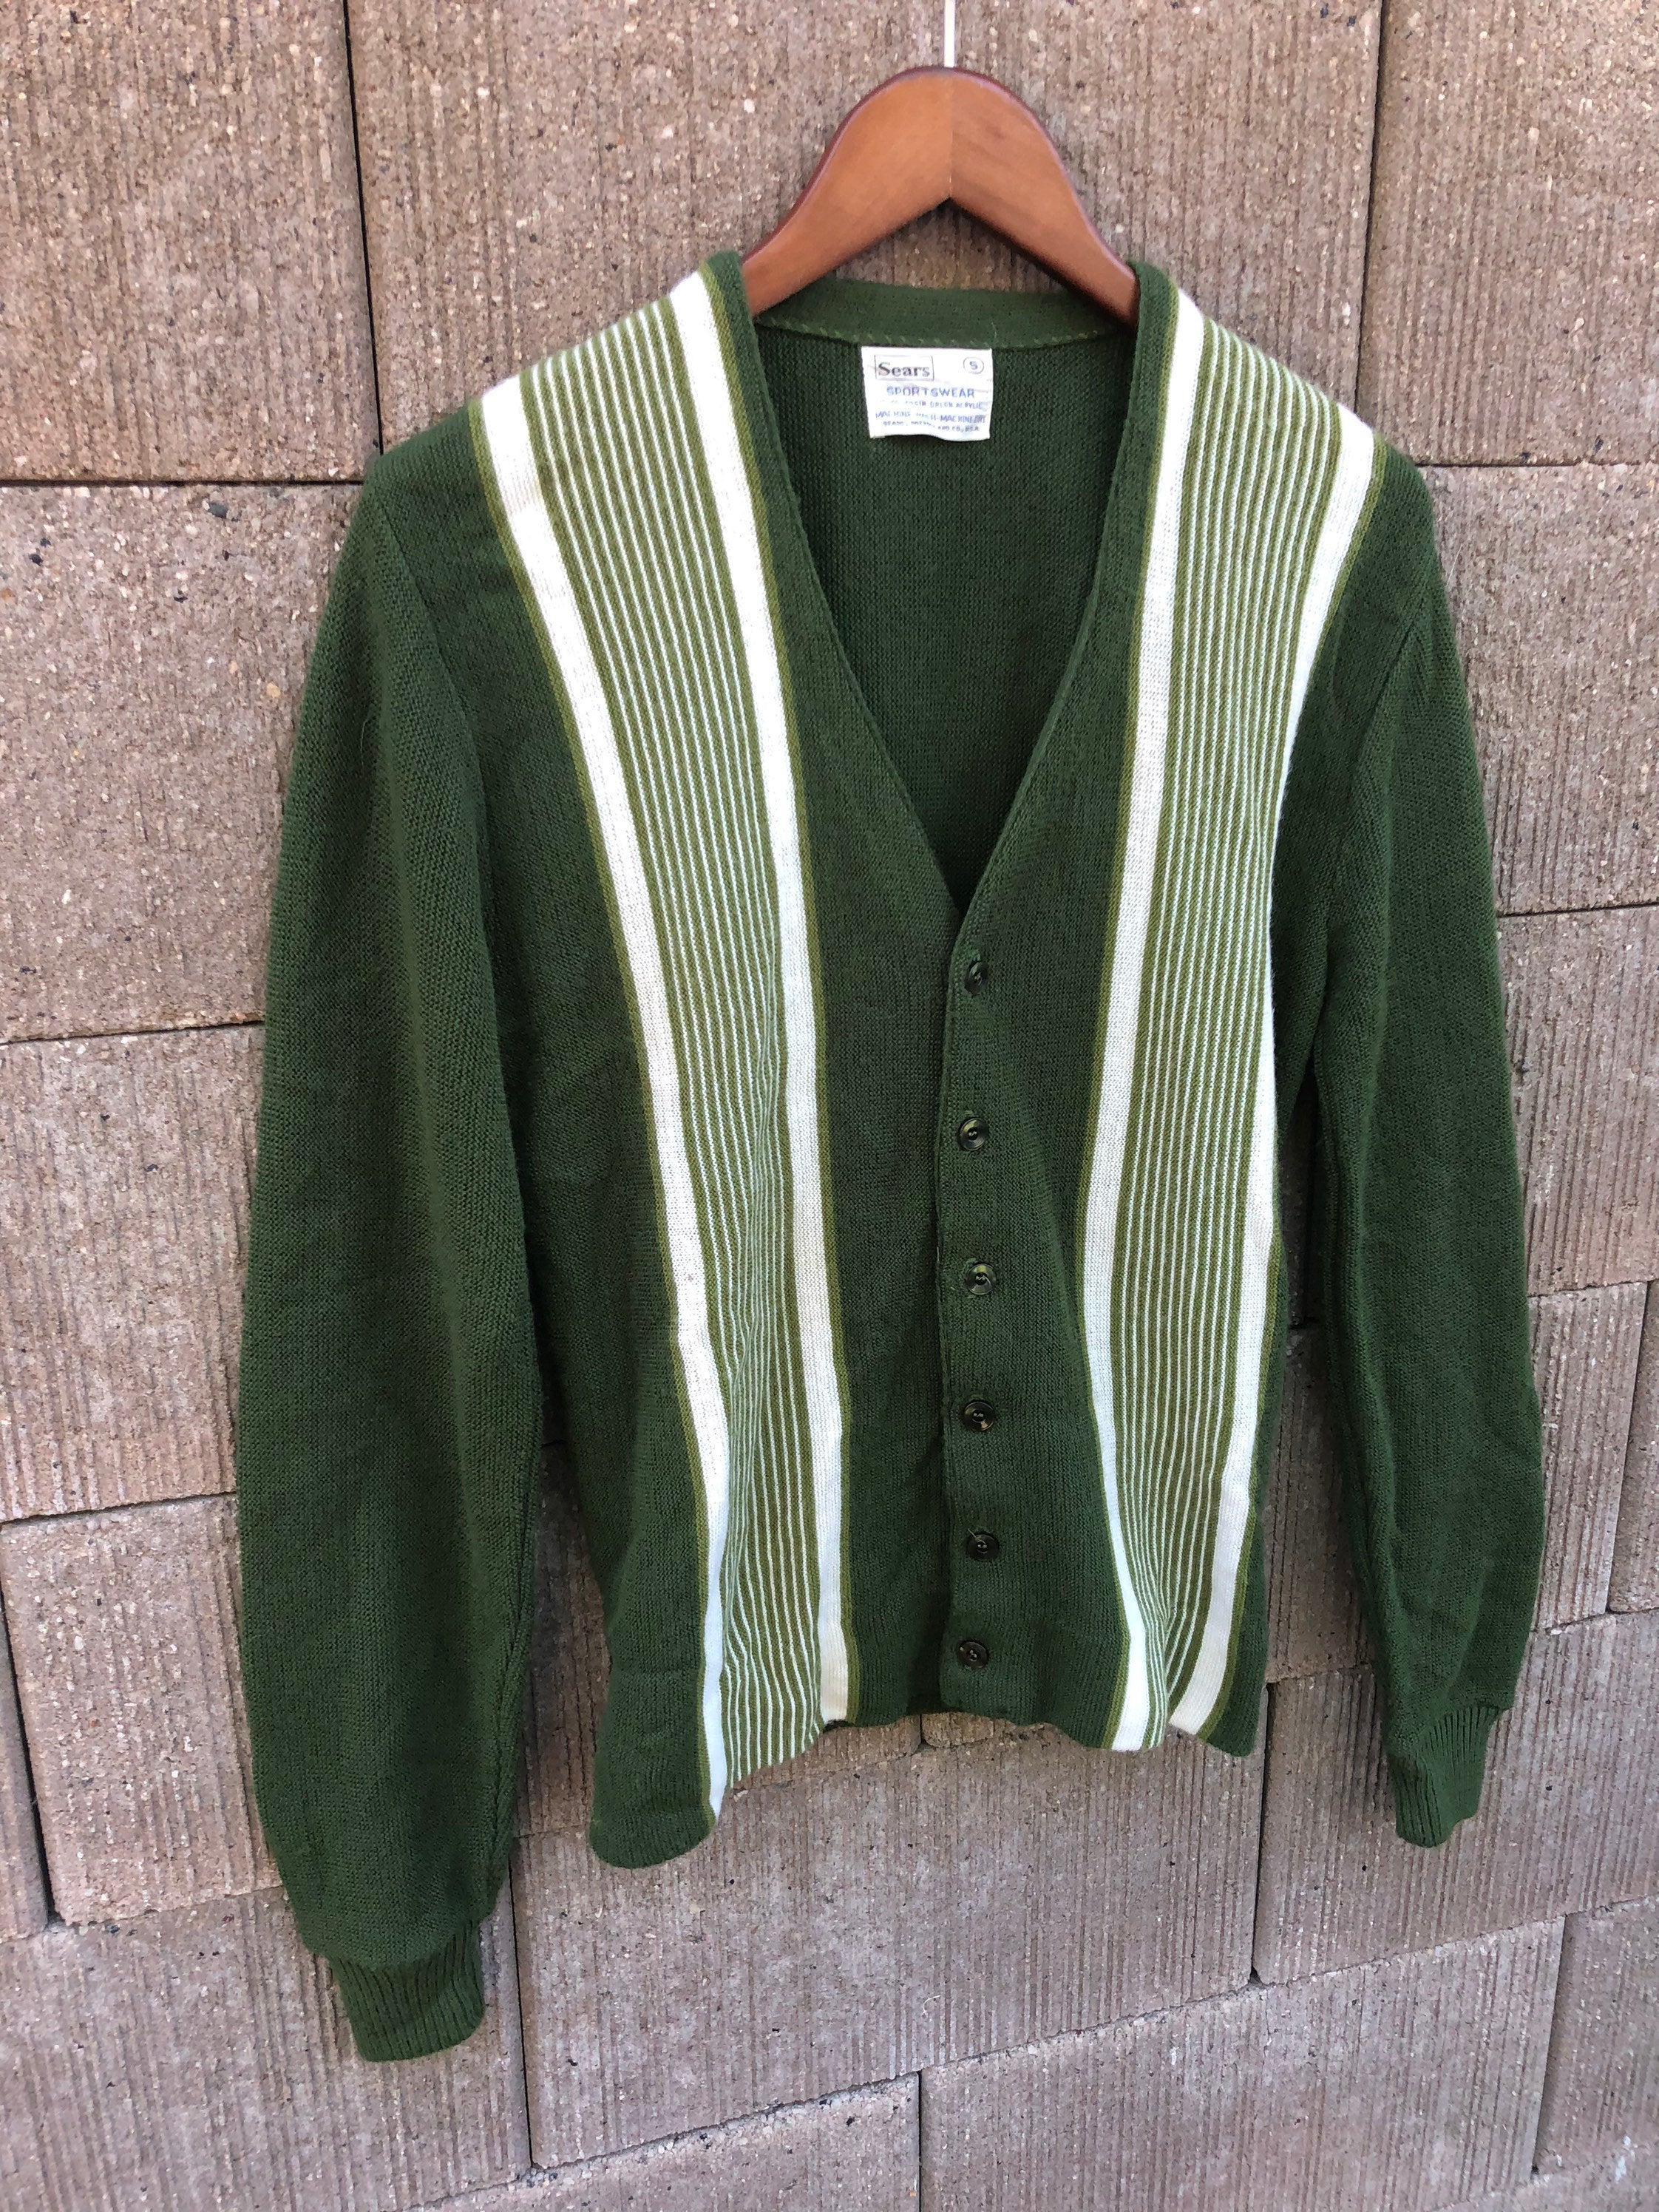 Vintage 50’s/60’s Green Stripe Panel Cardigan by Sears | Shop THRILLING